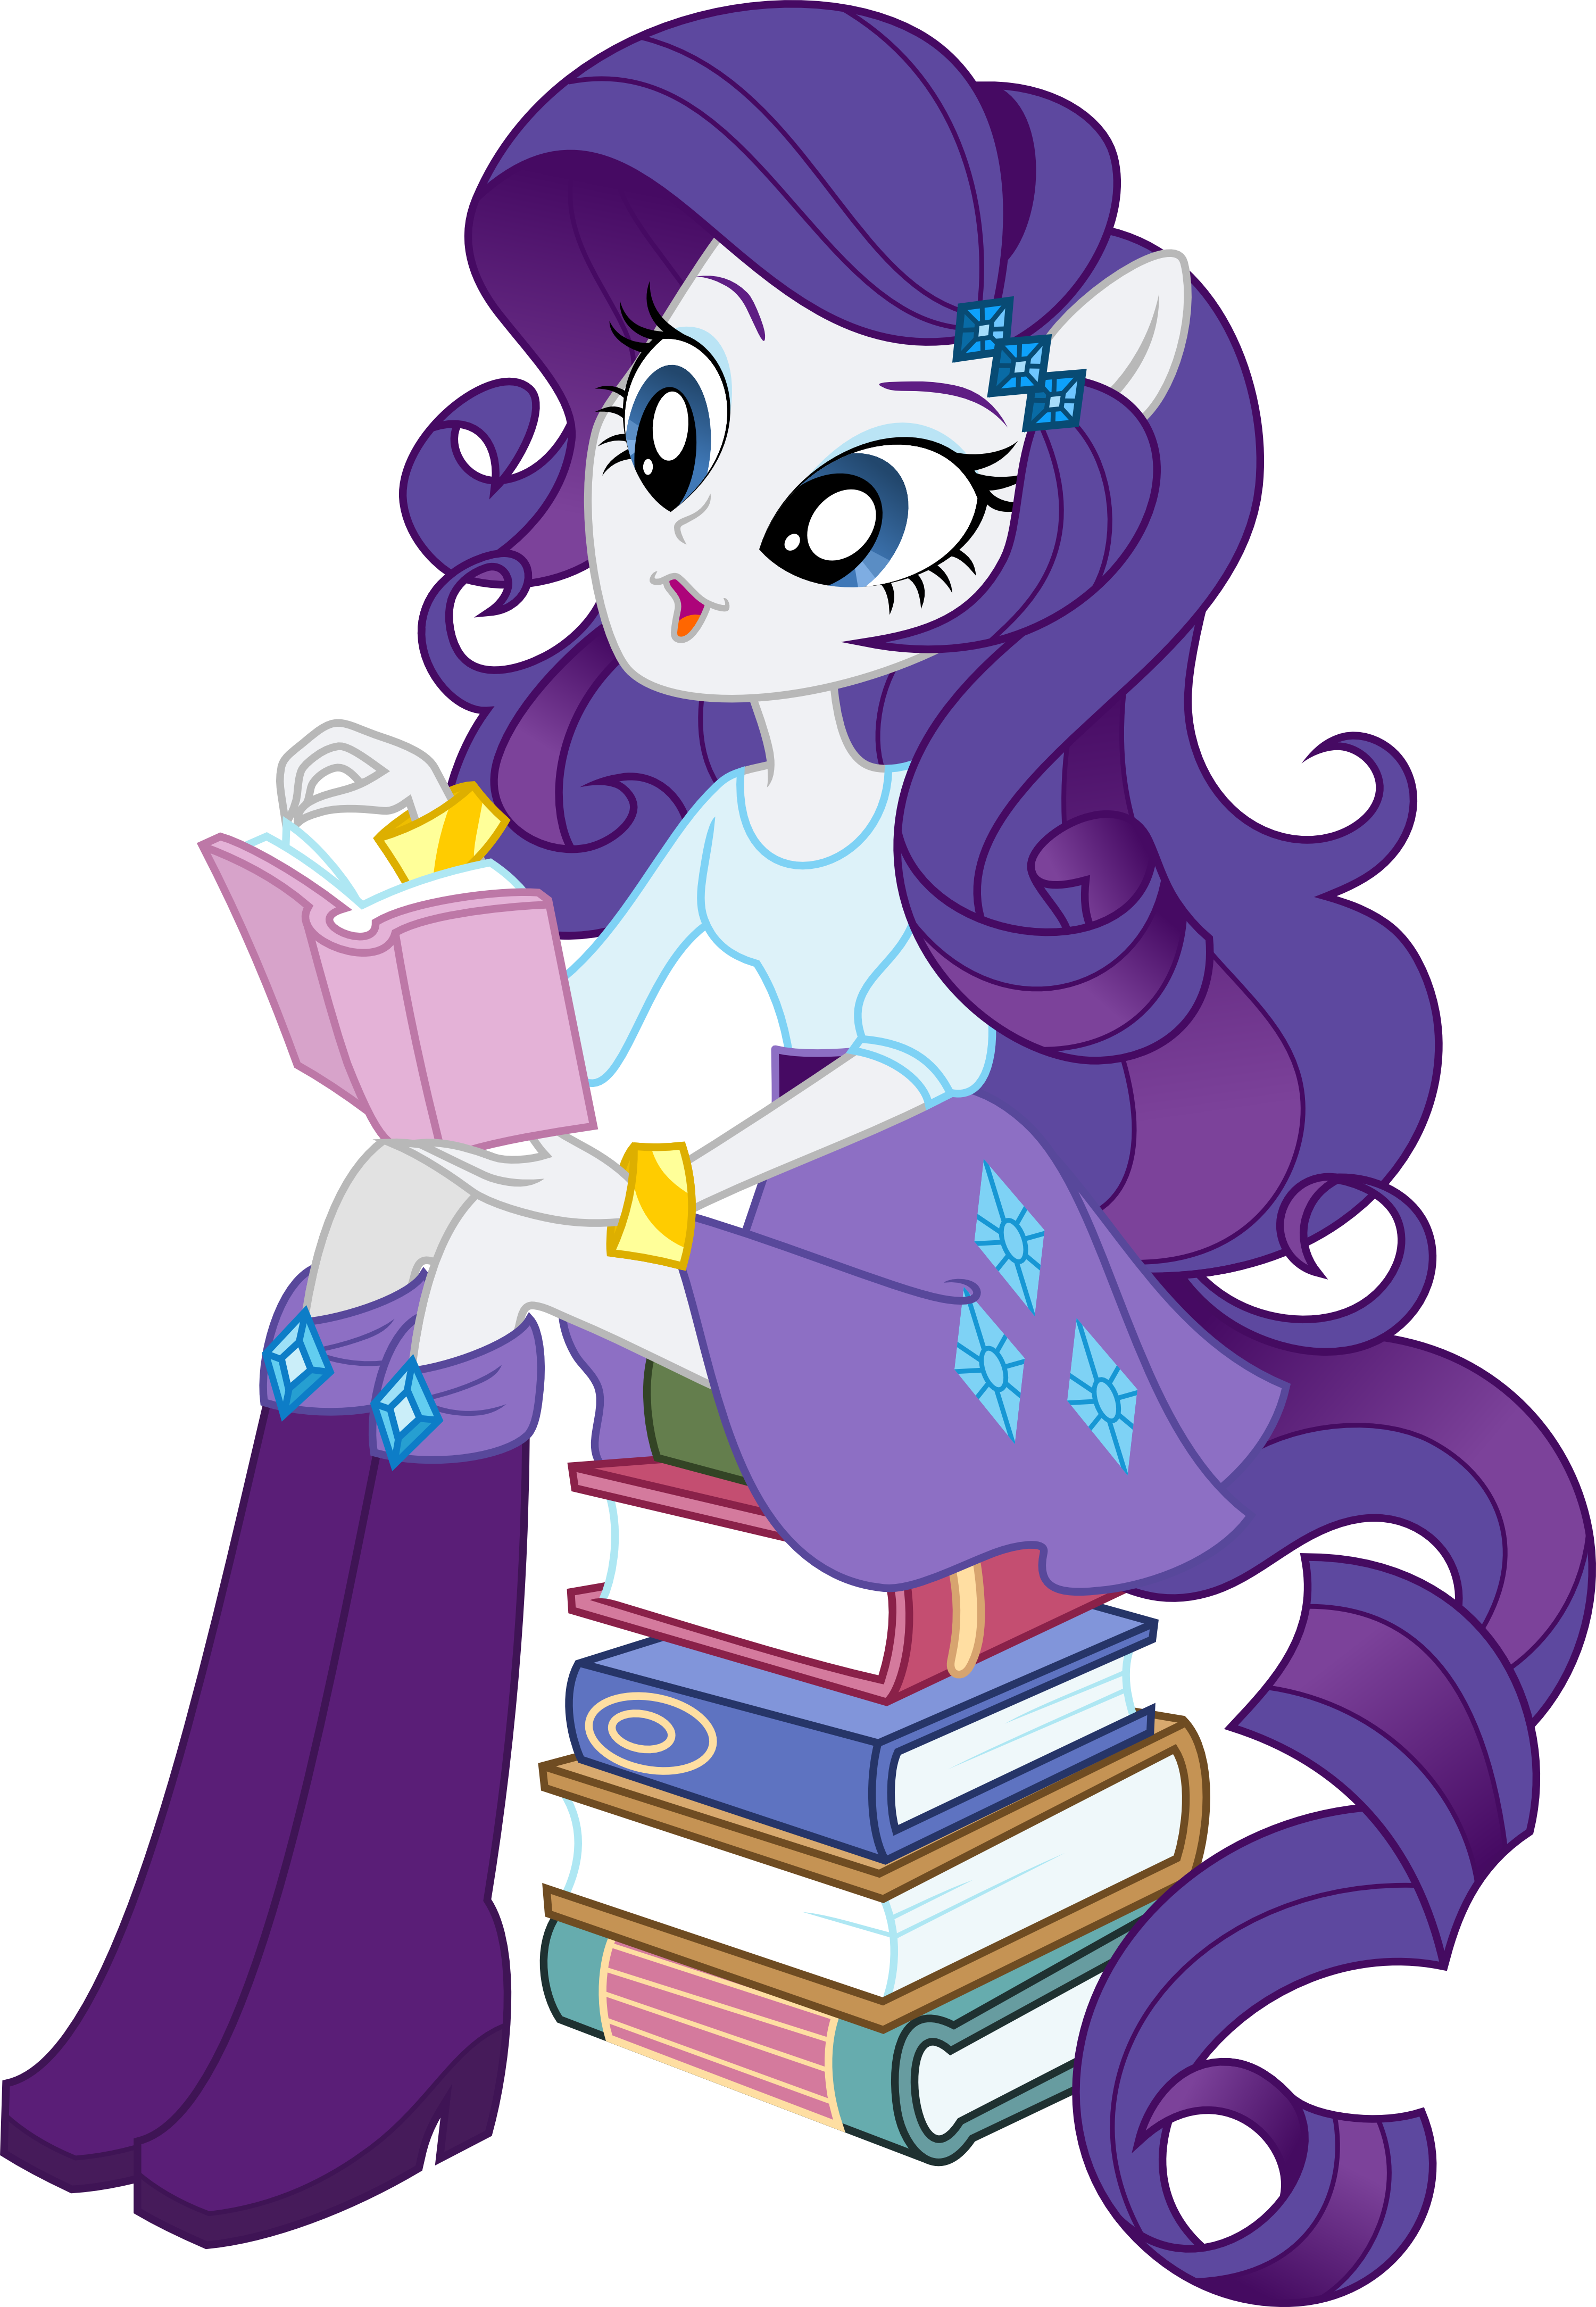 1416217__safe_artist-colon-aqua-dash-pony_rarity_equestria+girls_book_boots_bracelet_clothes_cute_high+heel+boots_jewel_jewelry_open+mouth_ponied+up_po.png